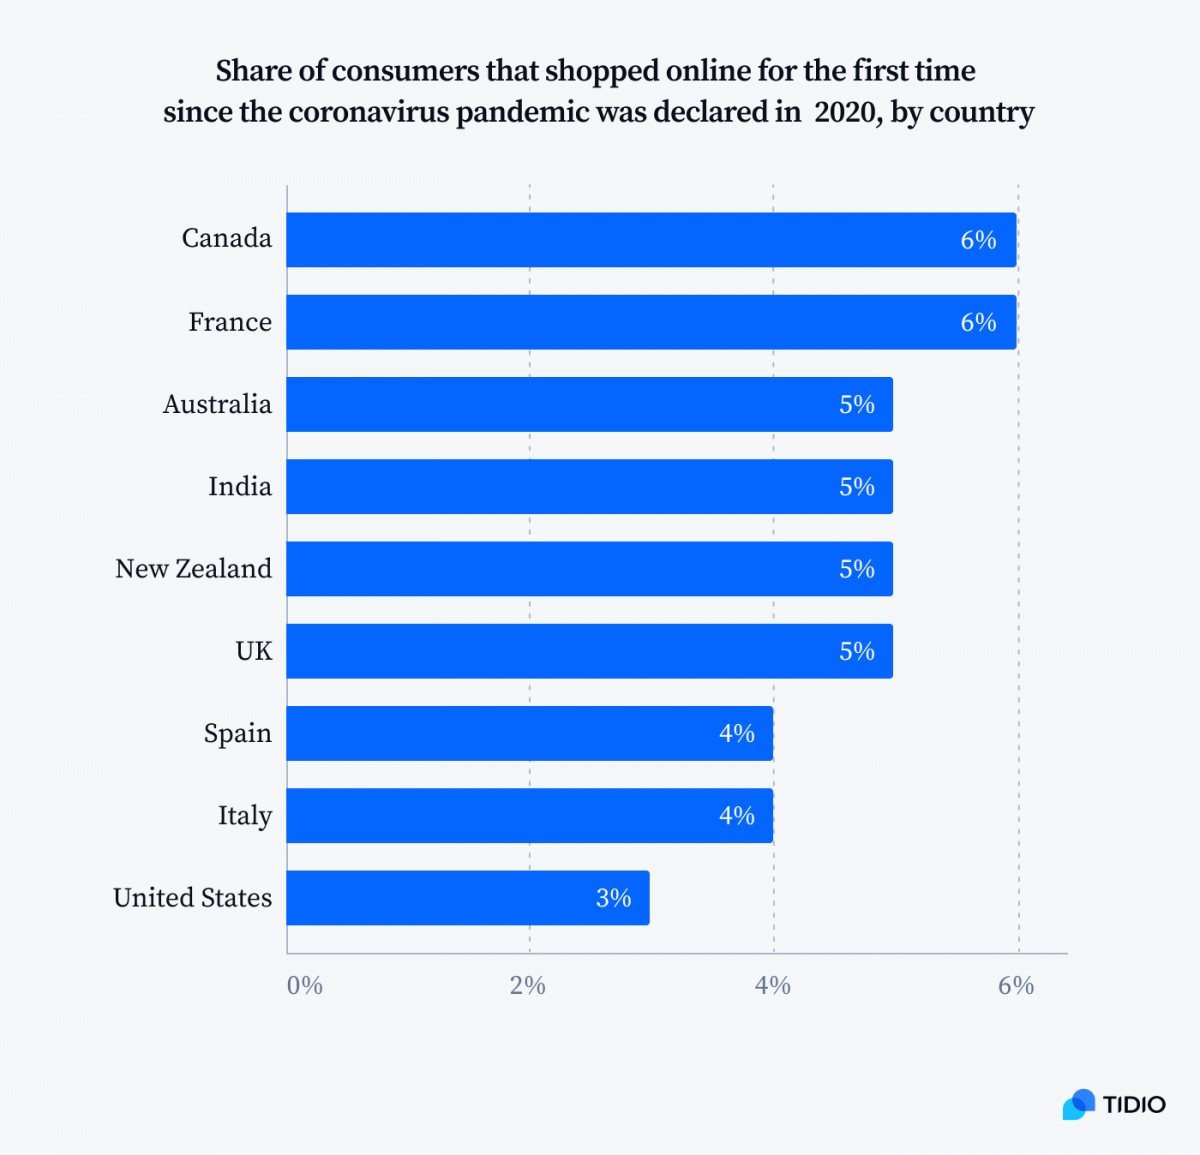 Graph titled Share of consumers that shopped online for the first time since the coronavirus pandemic was declared in 2020, by country